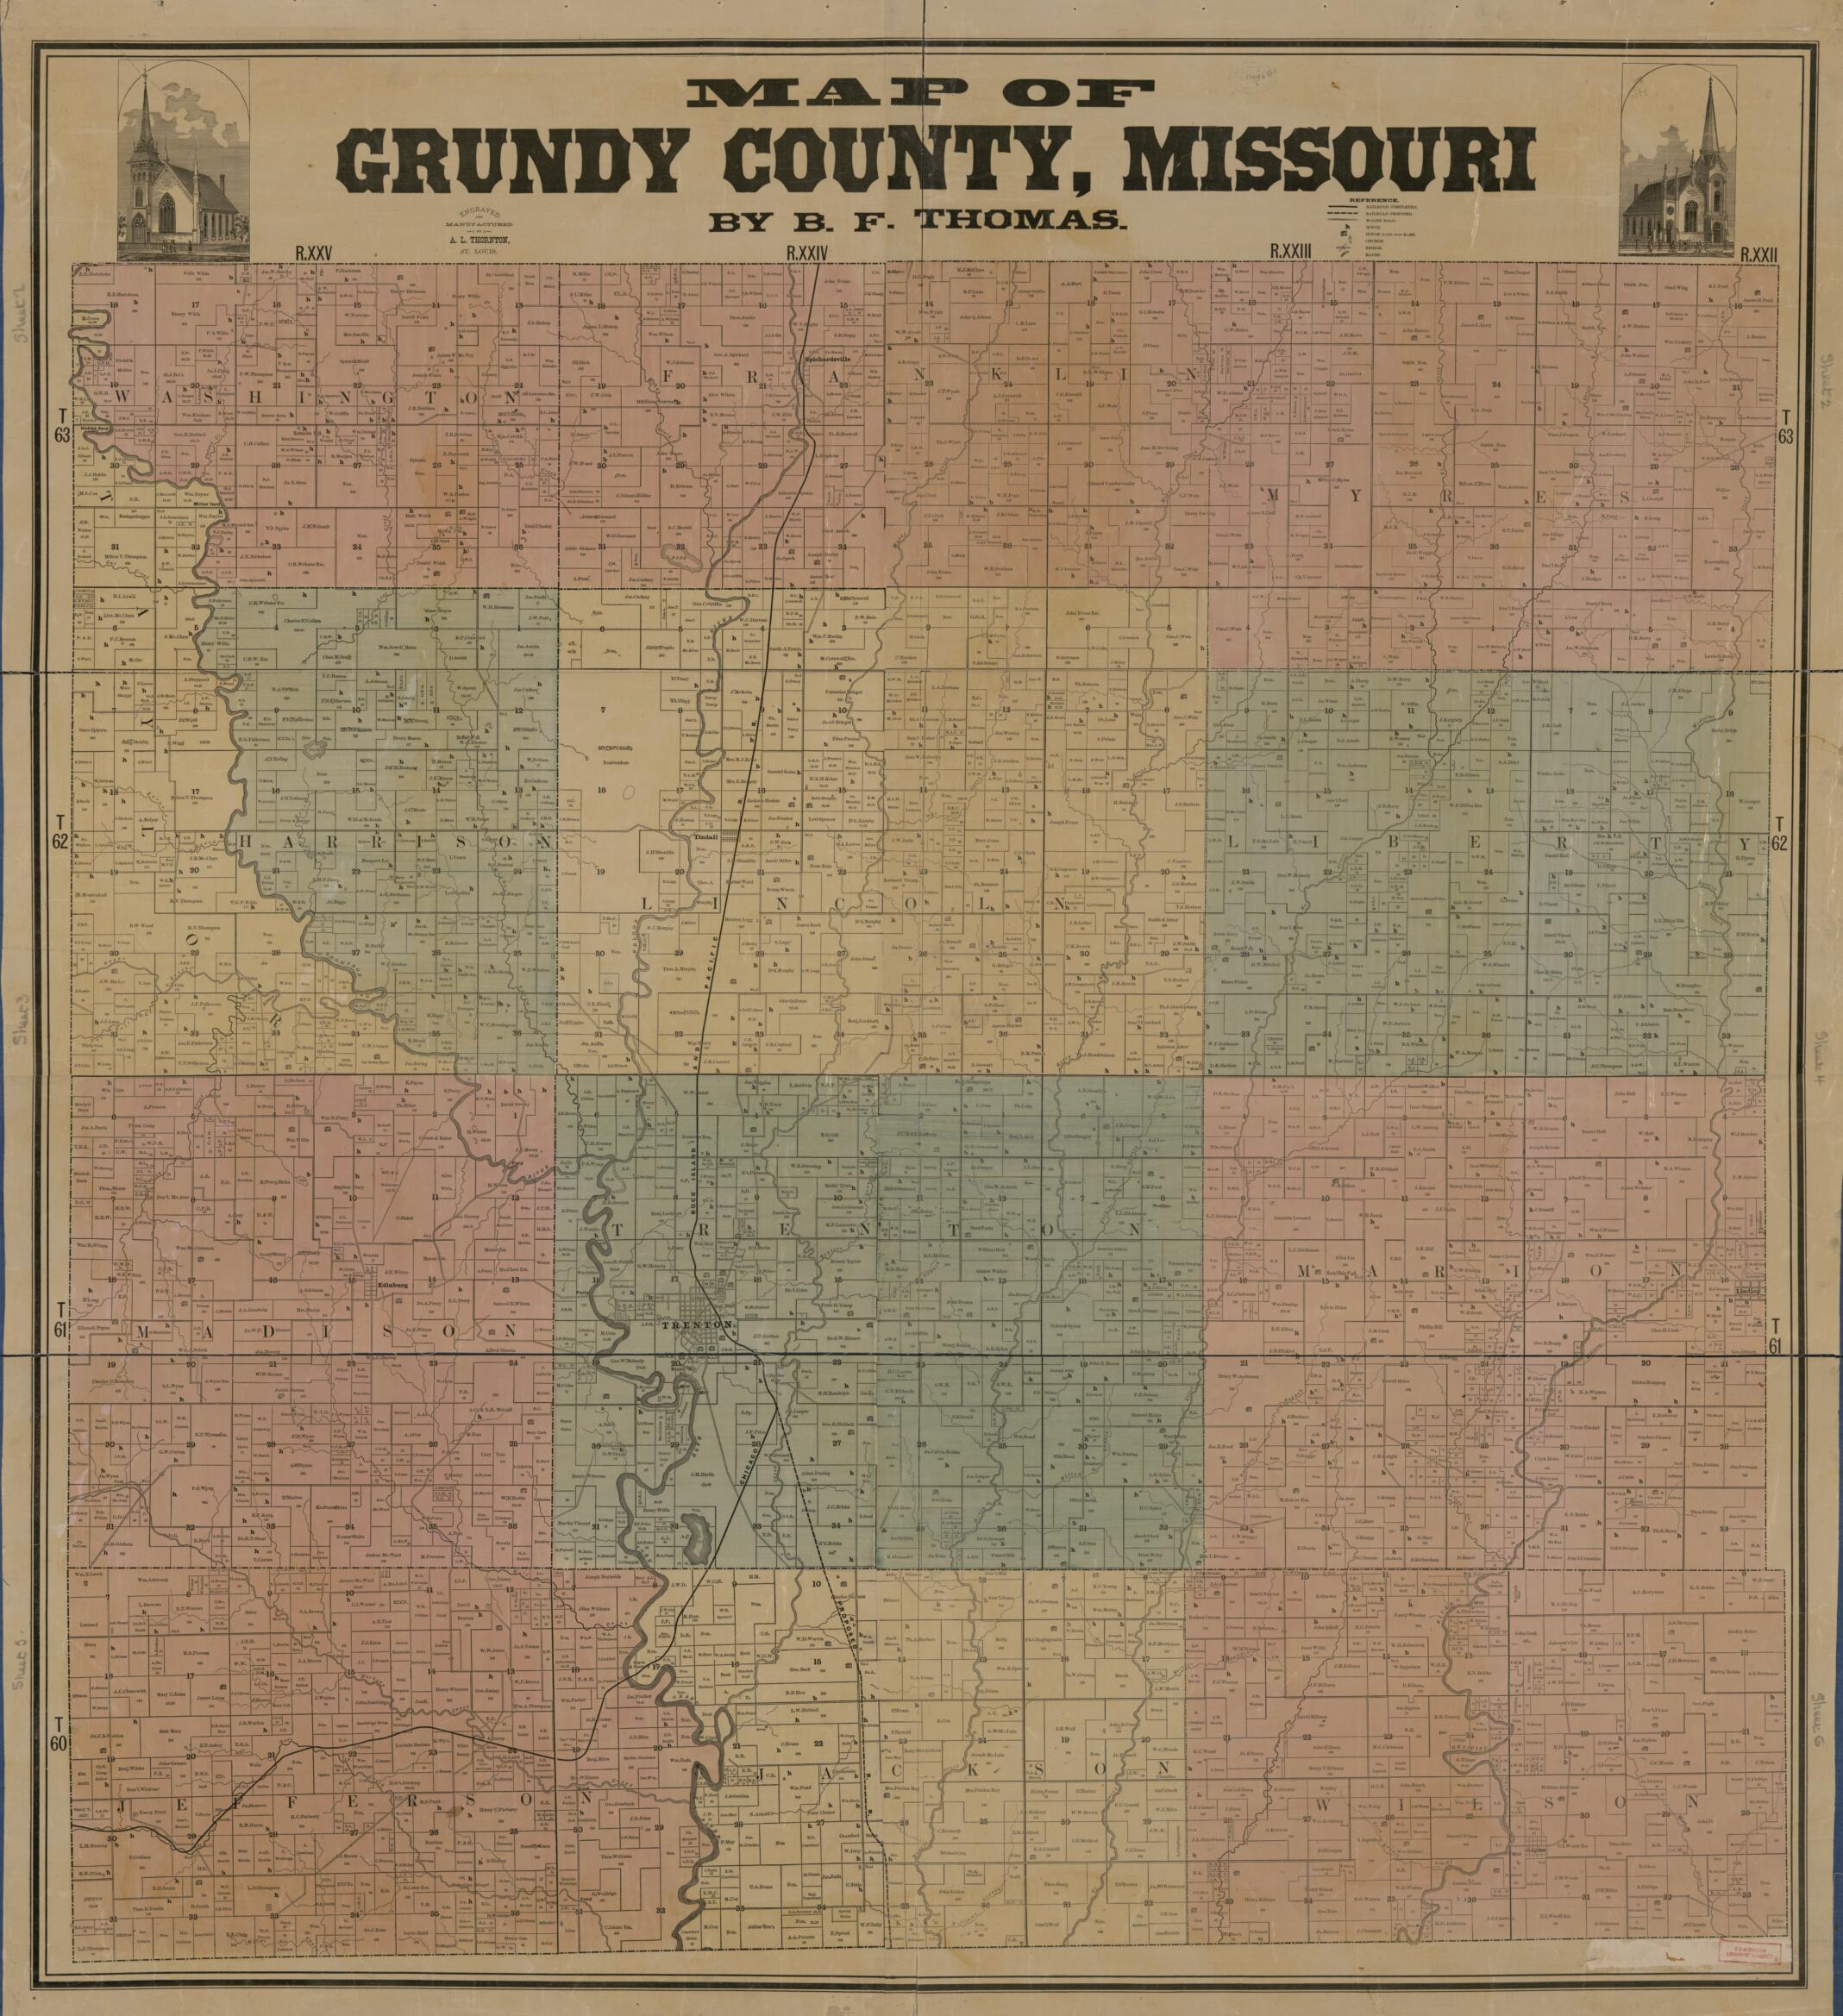 This old map of Map of Gundy County, Missouri from 1890 was created by B. F. Thomas in 1890